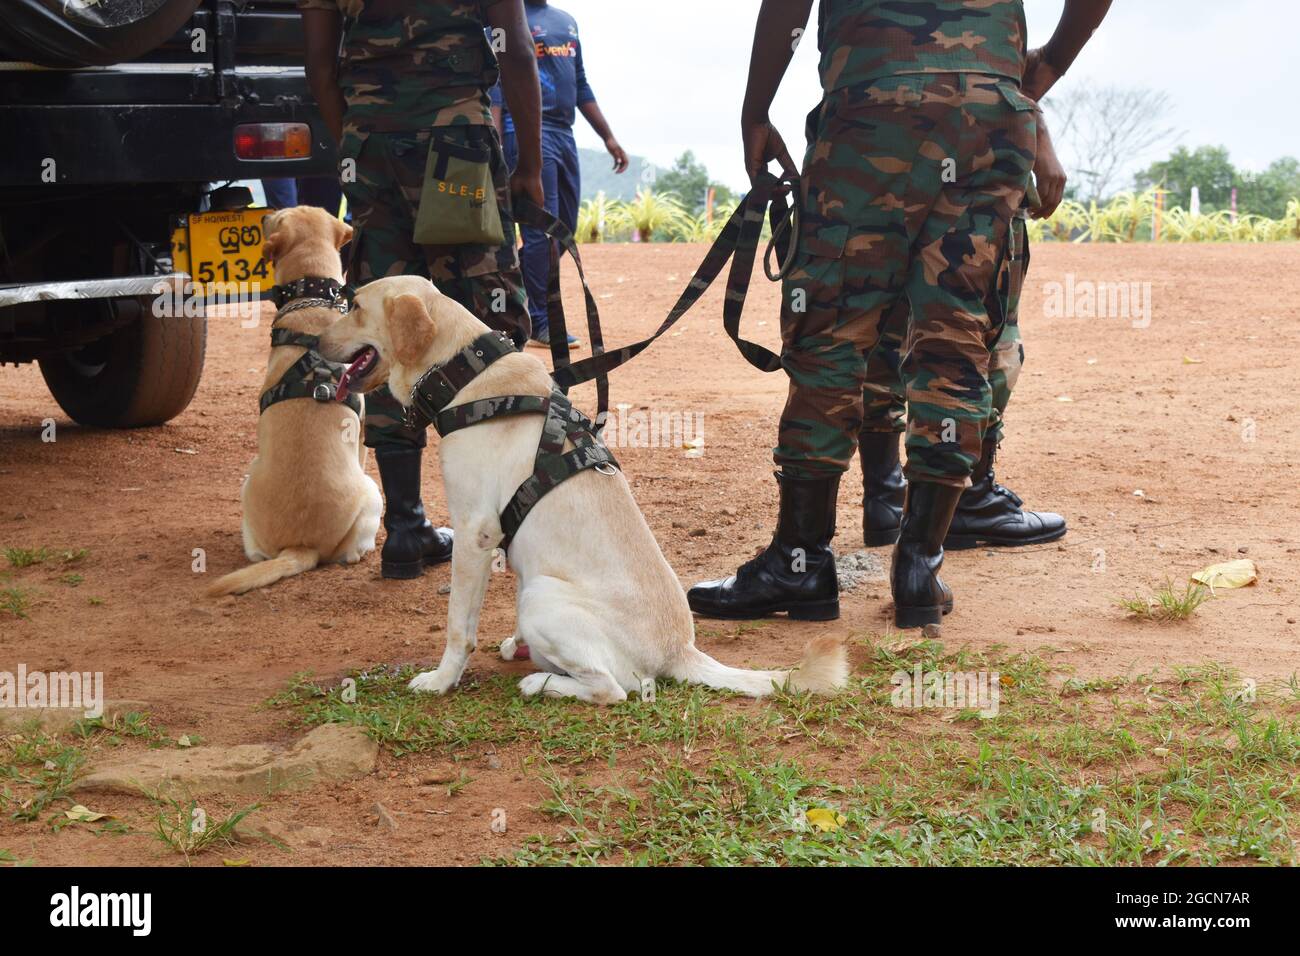 Labrador Retriever army dogs ready for searching the venue before a cricket match. At the picturesque Army Ordinance cricket grounds. Dombagoda. Sri Lanka. Stock Photo